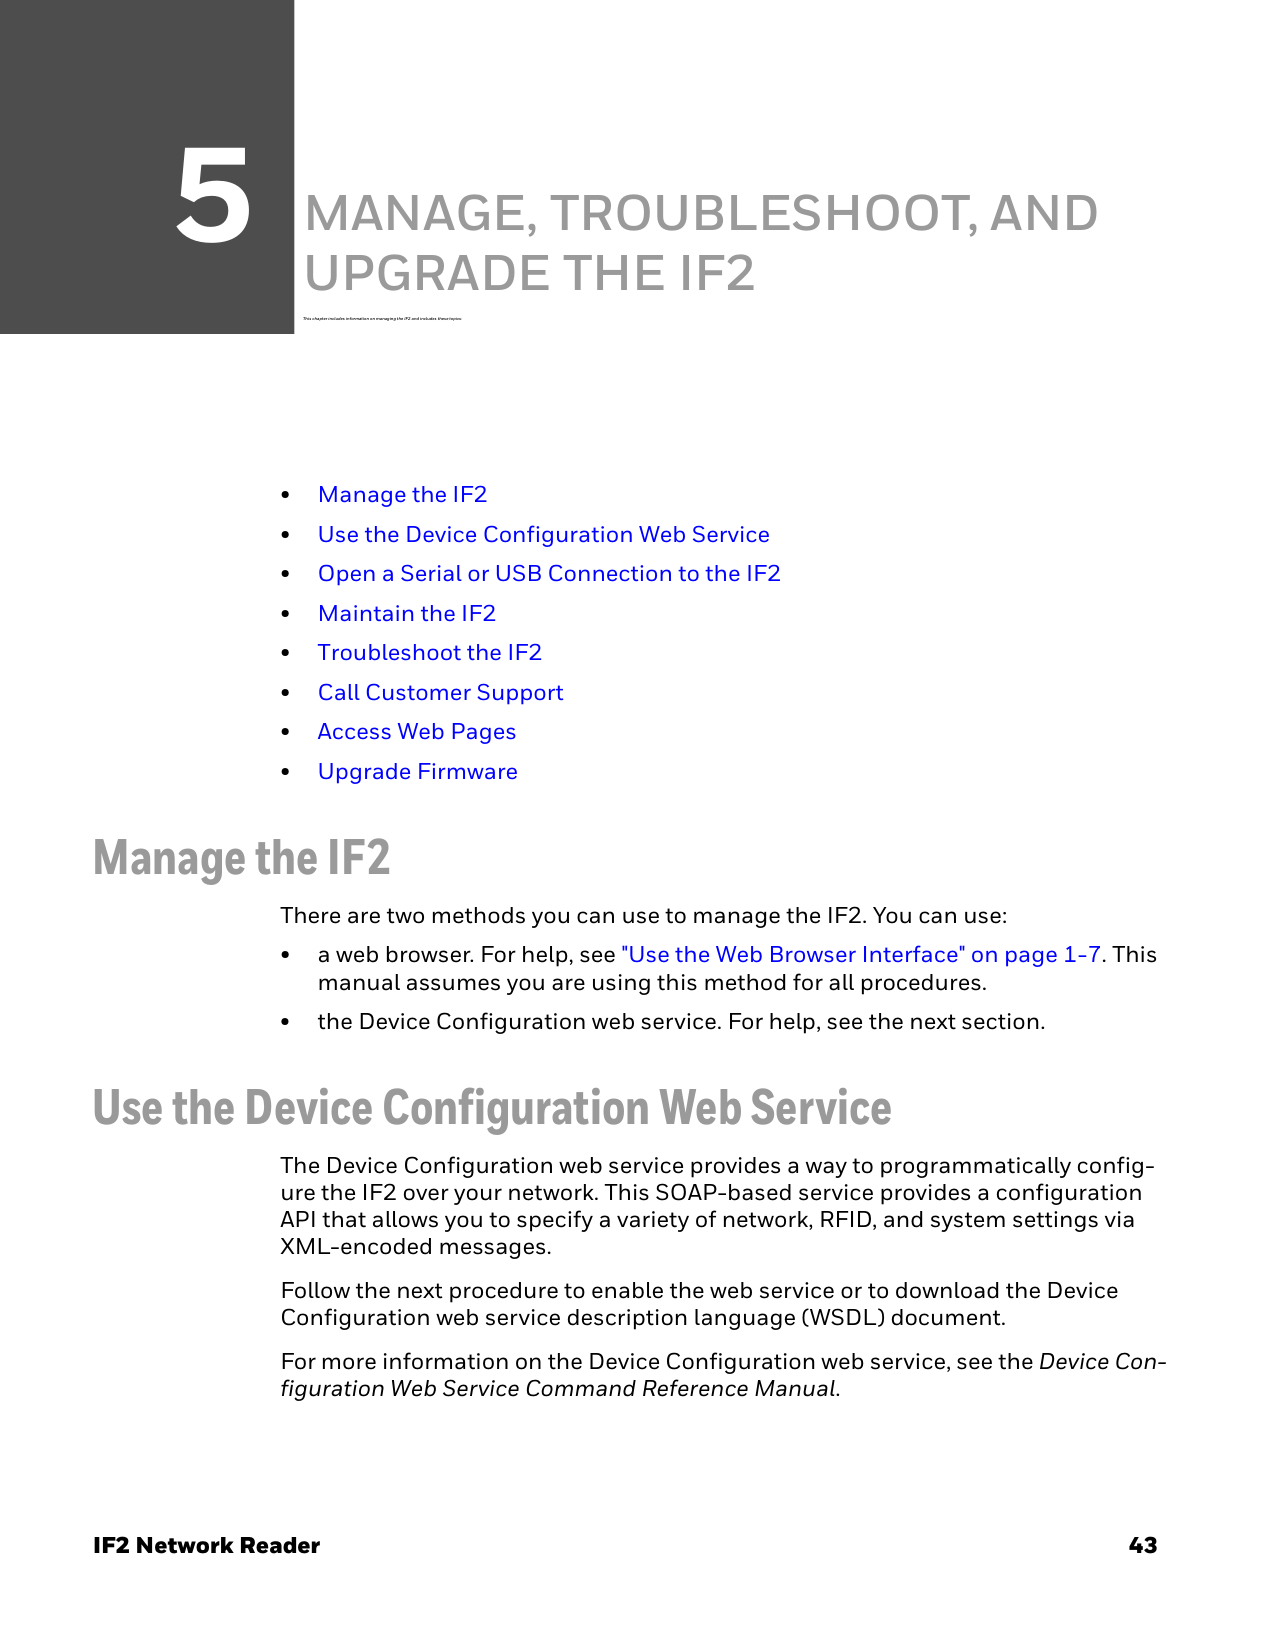 5IF2 Network Reader 43MANAGE, TROUBLESHOOT, AND UPGRADE THE IF2This chapter includes in formation on managing the IF2 and includes these topi cs:•Manage the IF2•Use the Device Configuration Web Service•Open a Serial or USB Connection to the IF2•Maintain the IF2•Troubleshoot the IF2•Call Customer Support•Access Web Pages•Upgrade FirmwareManage the IF2There are two methods you can use to manage the IF2. You can use:• a web browser. For help, see &quot;Use the Web Browser Interface&quot; on page 1-7. This manual assumes you are using this method for all procedures.• the Device Configuration web service. For help, see the next section.Use the Device Configuration Web ServiceThe Device Configuration web service provides a way to programmatically config-ure the IF2 over your network. This SOAP-based service provides a configuration API that allows you to specify a variety of network, RFID, and system settings via XML-encoded messages.Follow the next procedure to enable the web service or to download the Device Configuration web service description language (WSDL) document.For more information on the Device Configuration web service, see the Device Con-figuration Web Service Command Reference Manual.